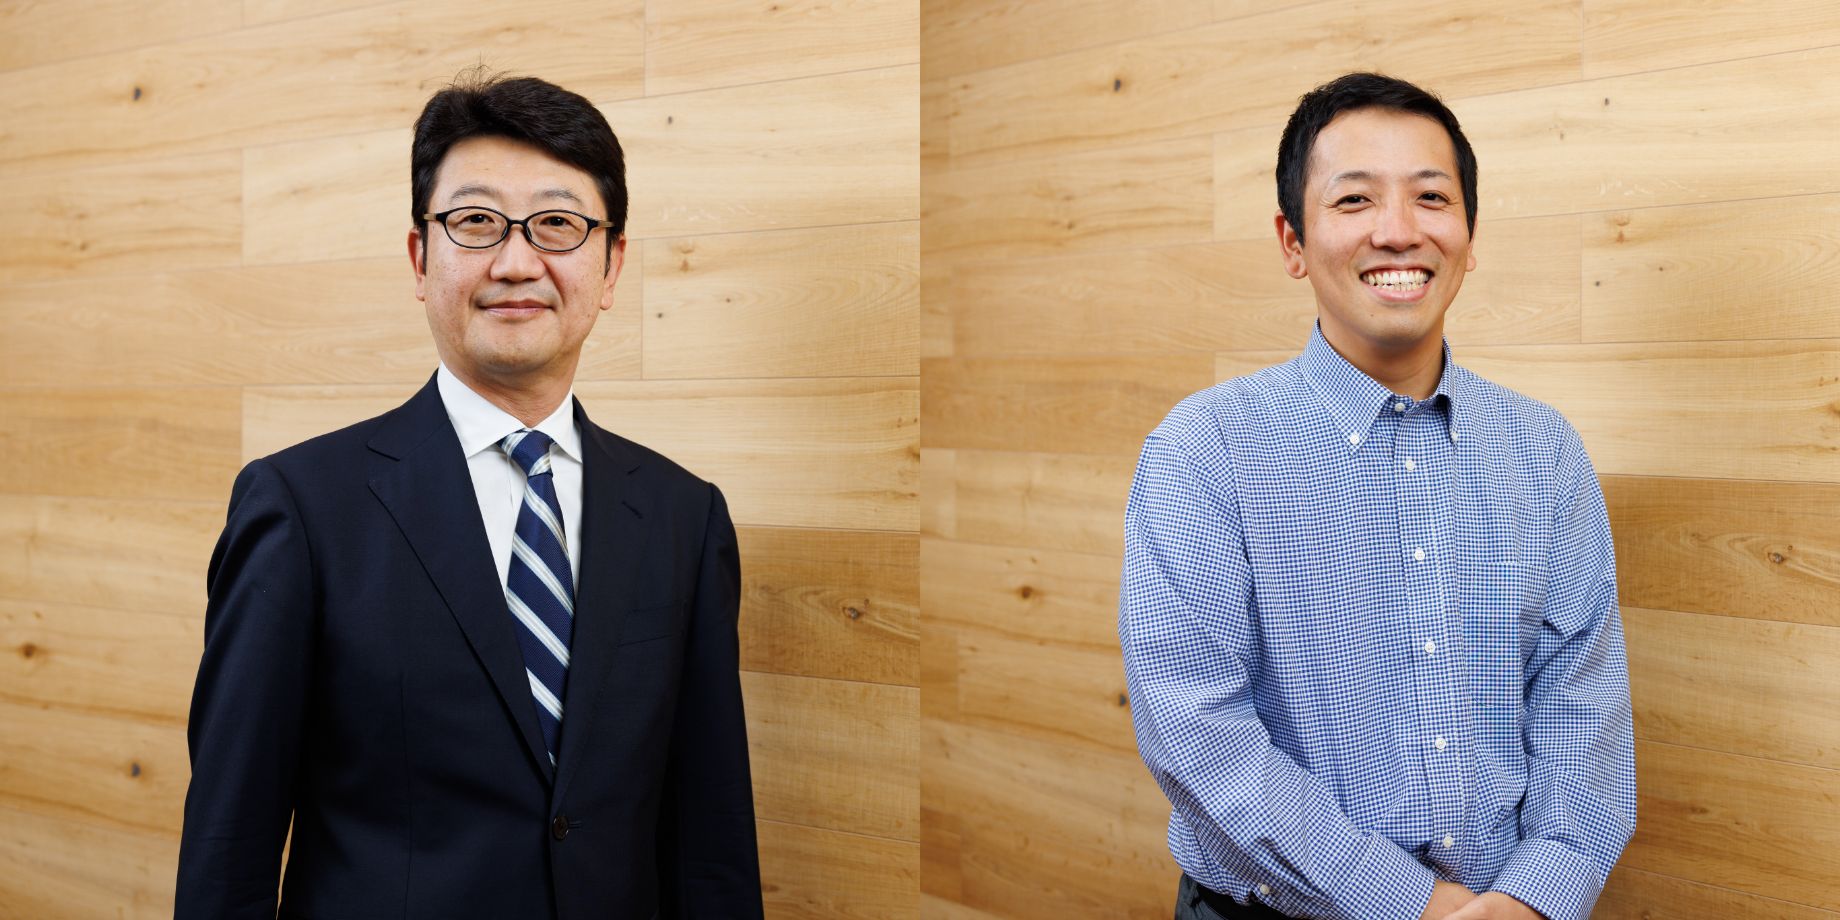 Toshiyuki Otobe, Executive Officer and President of the Personnel Unit (left) and Shinsaku Takano of the DX Strategy Division (right)